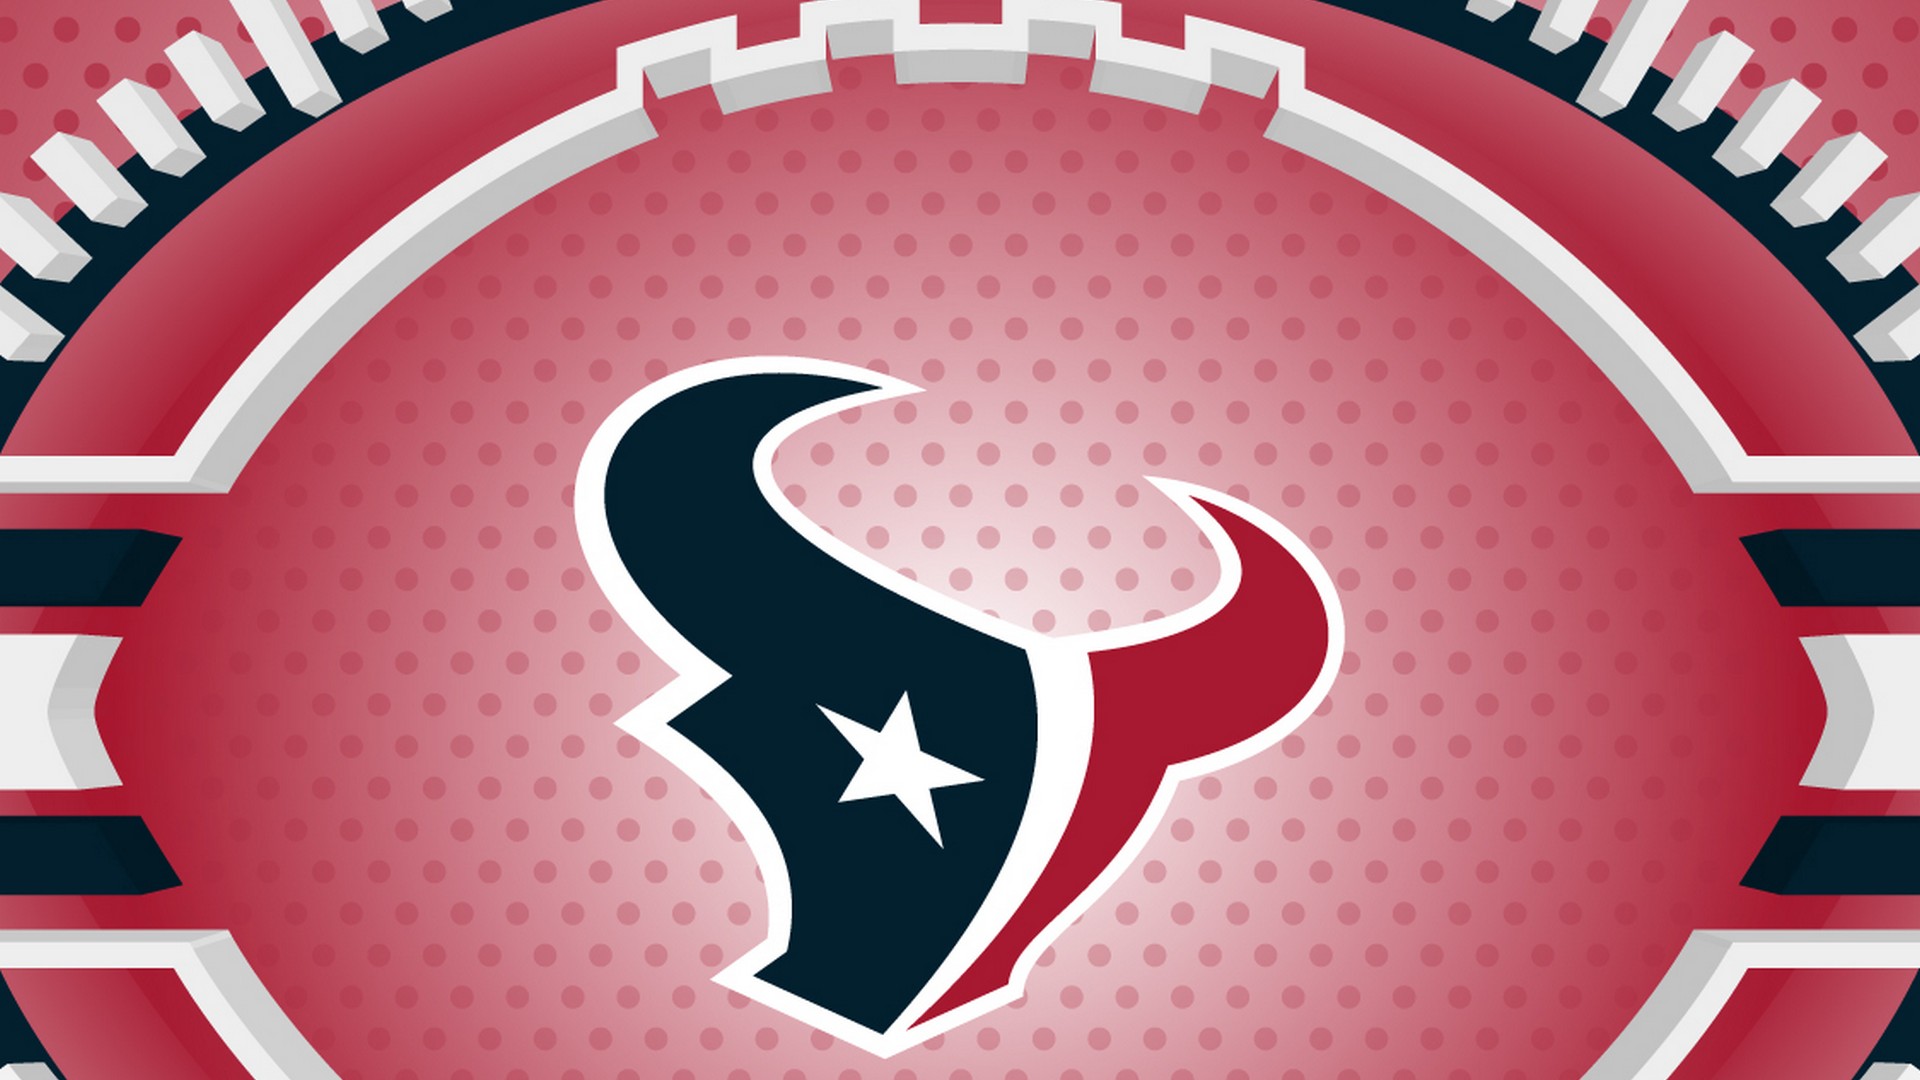 Wallpapers HD Houston Texans NFL with resolution 1920x1080 pixel. You can make this wallpaper for your Mac or Windows Desktop Background, iPhone, Android or Tablet and another Smartphone device